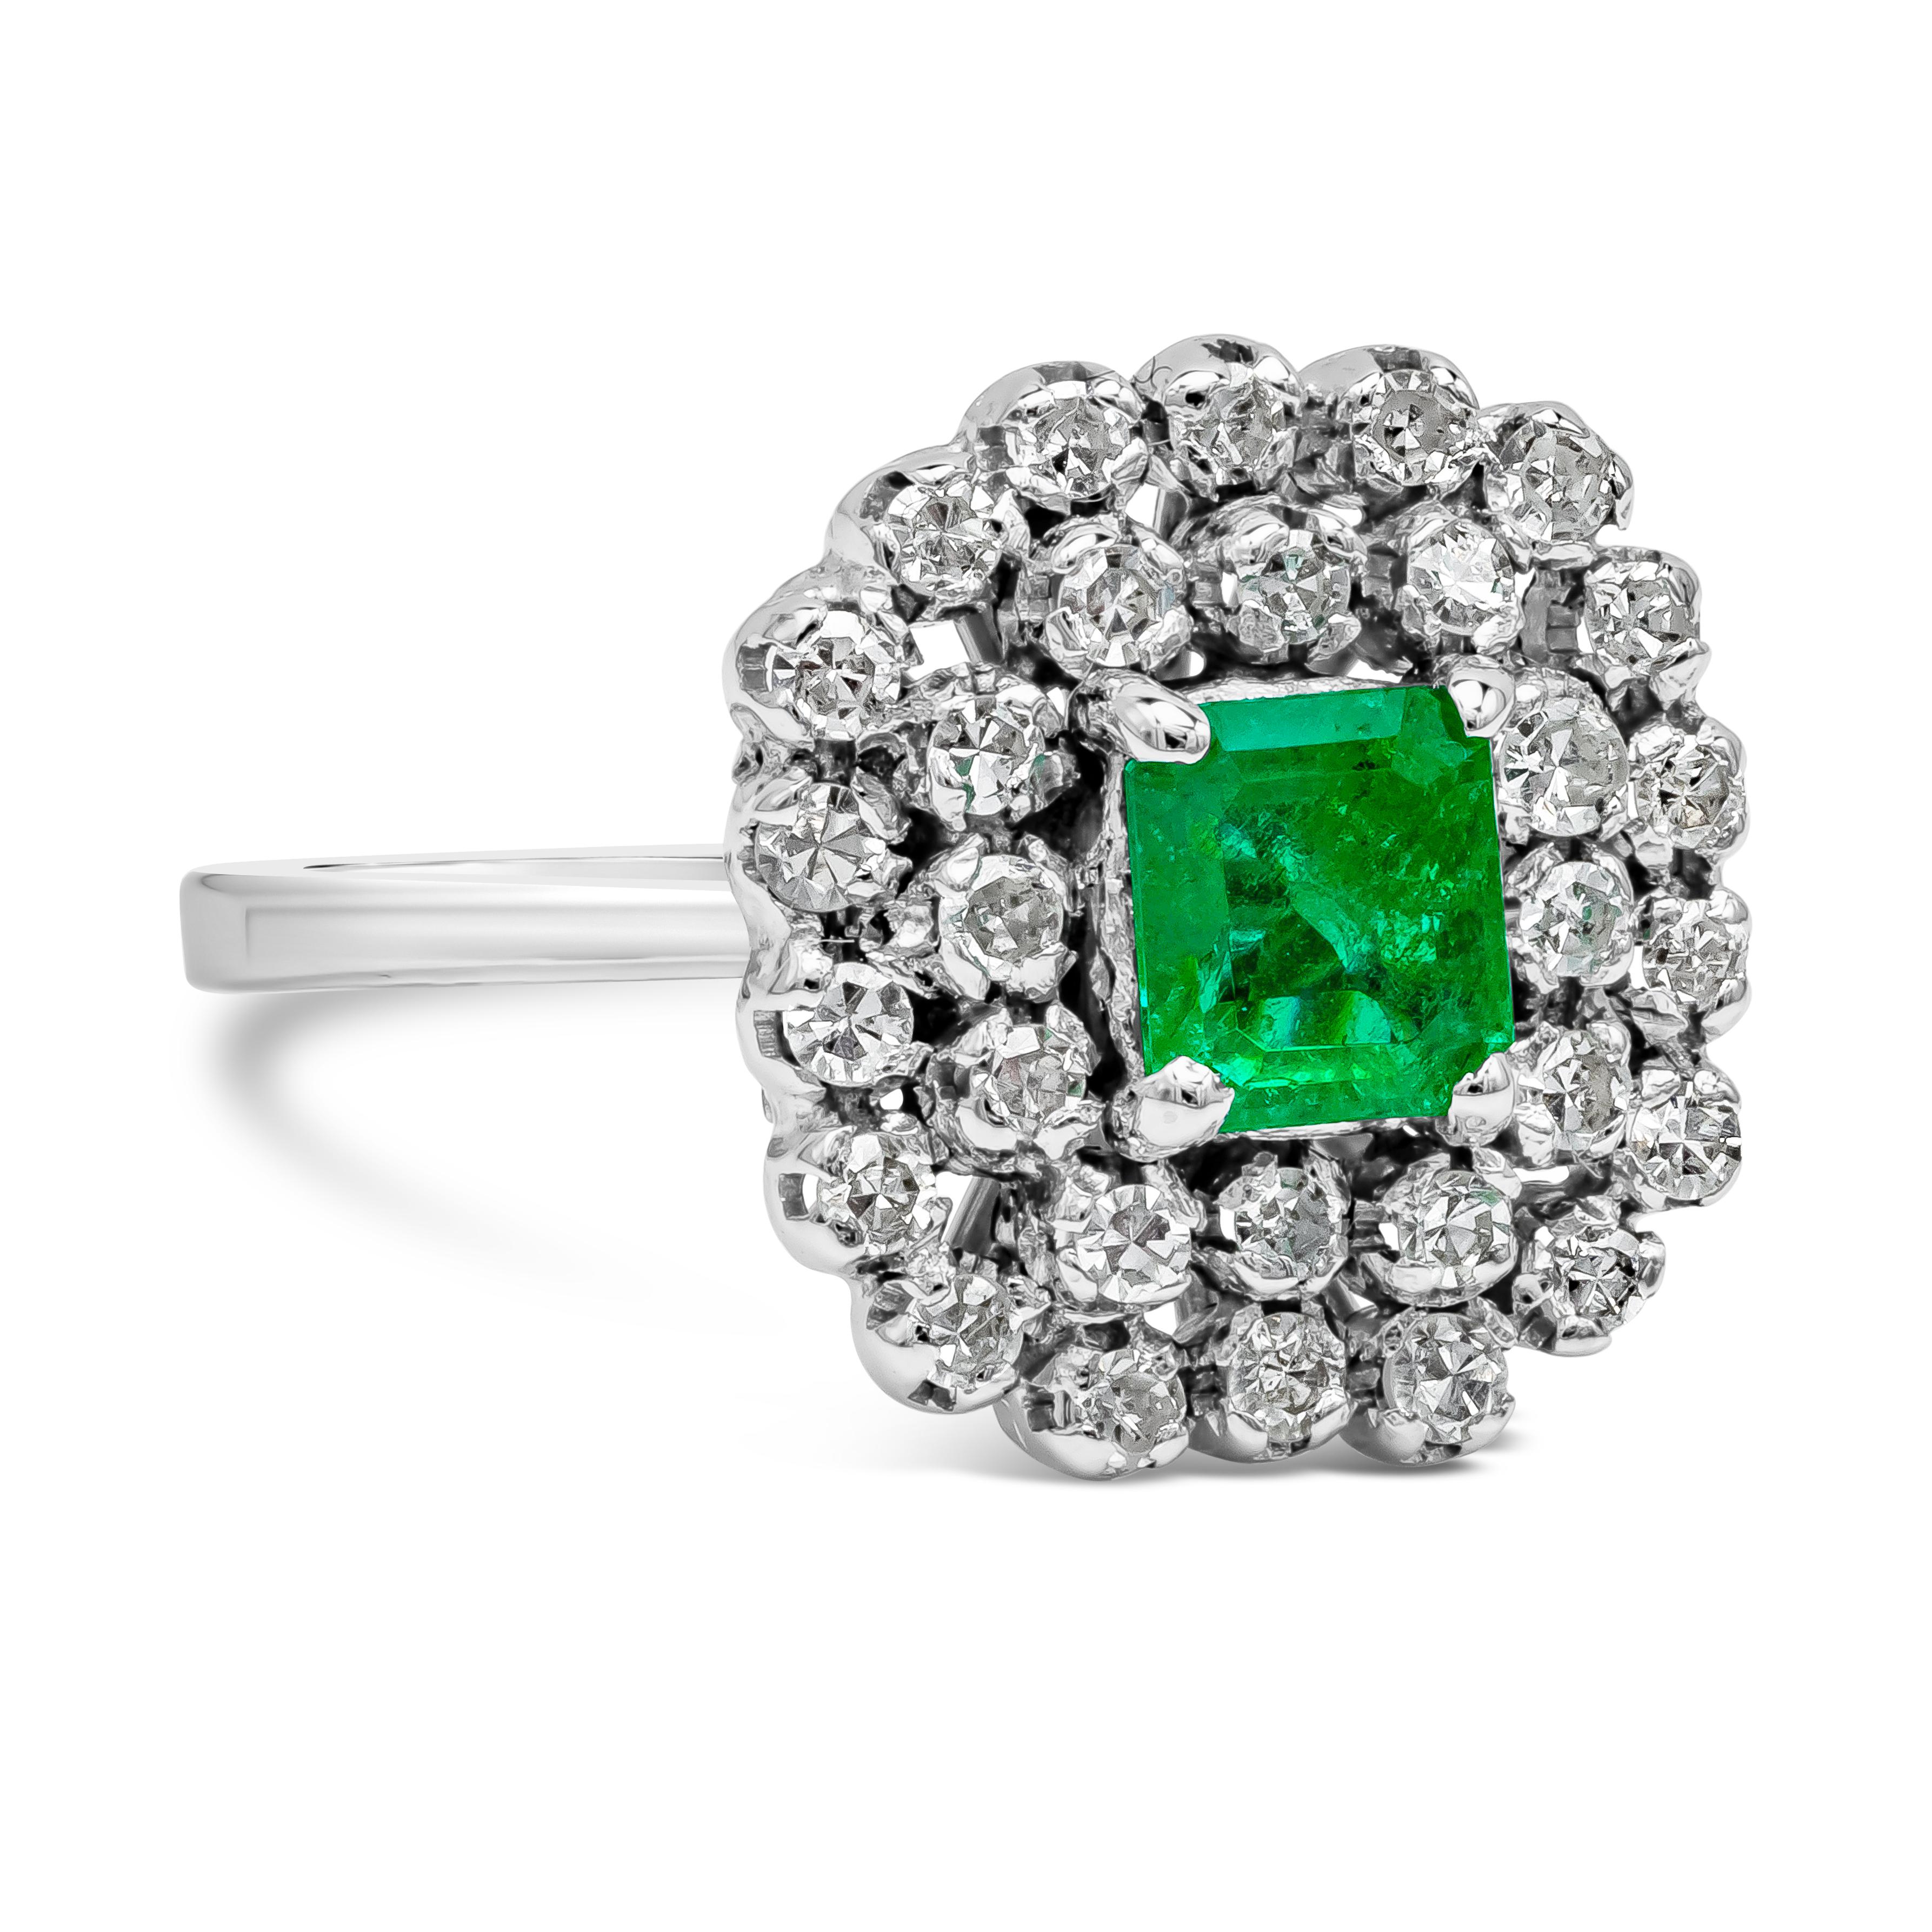 A beautiful antique ring, showcasing a 0.75 carat emerald cut green emerald set on a four prong setting. Surrounded by single cut round diamonds arranged in a cluster style weighing 0.30 carat total. Made with 14K white gold. Size 6.25 US, resizable